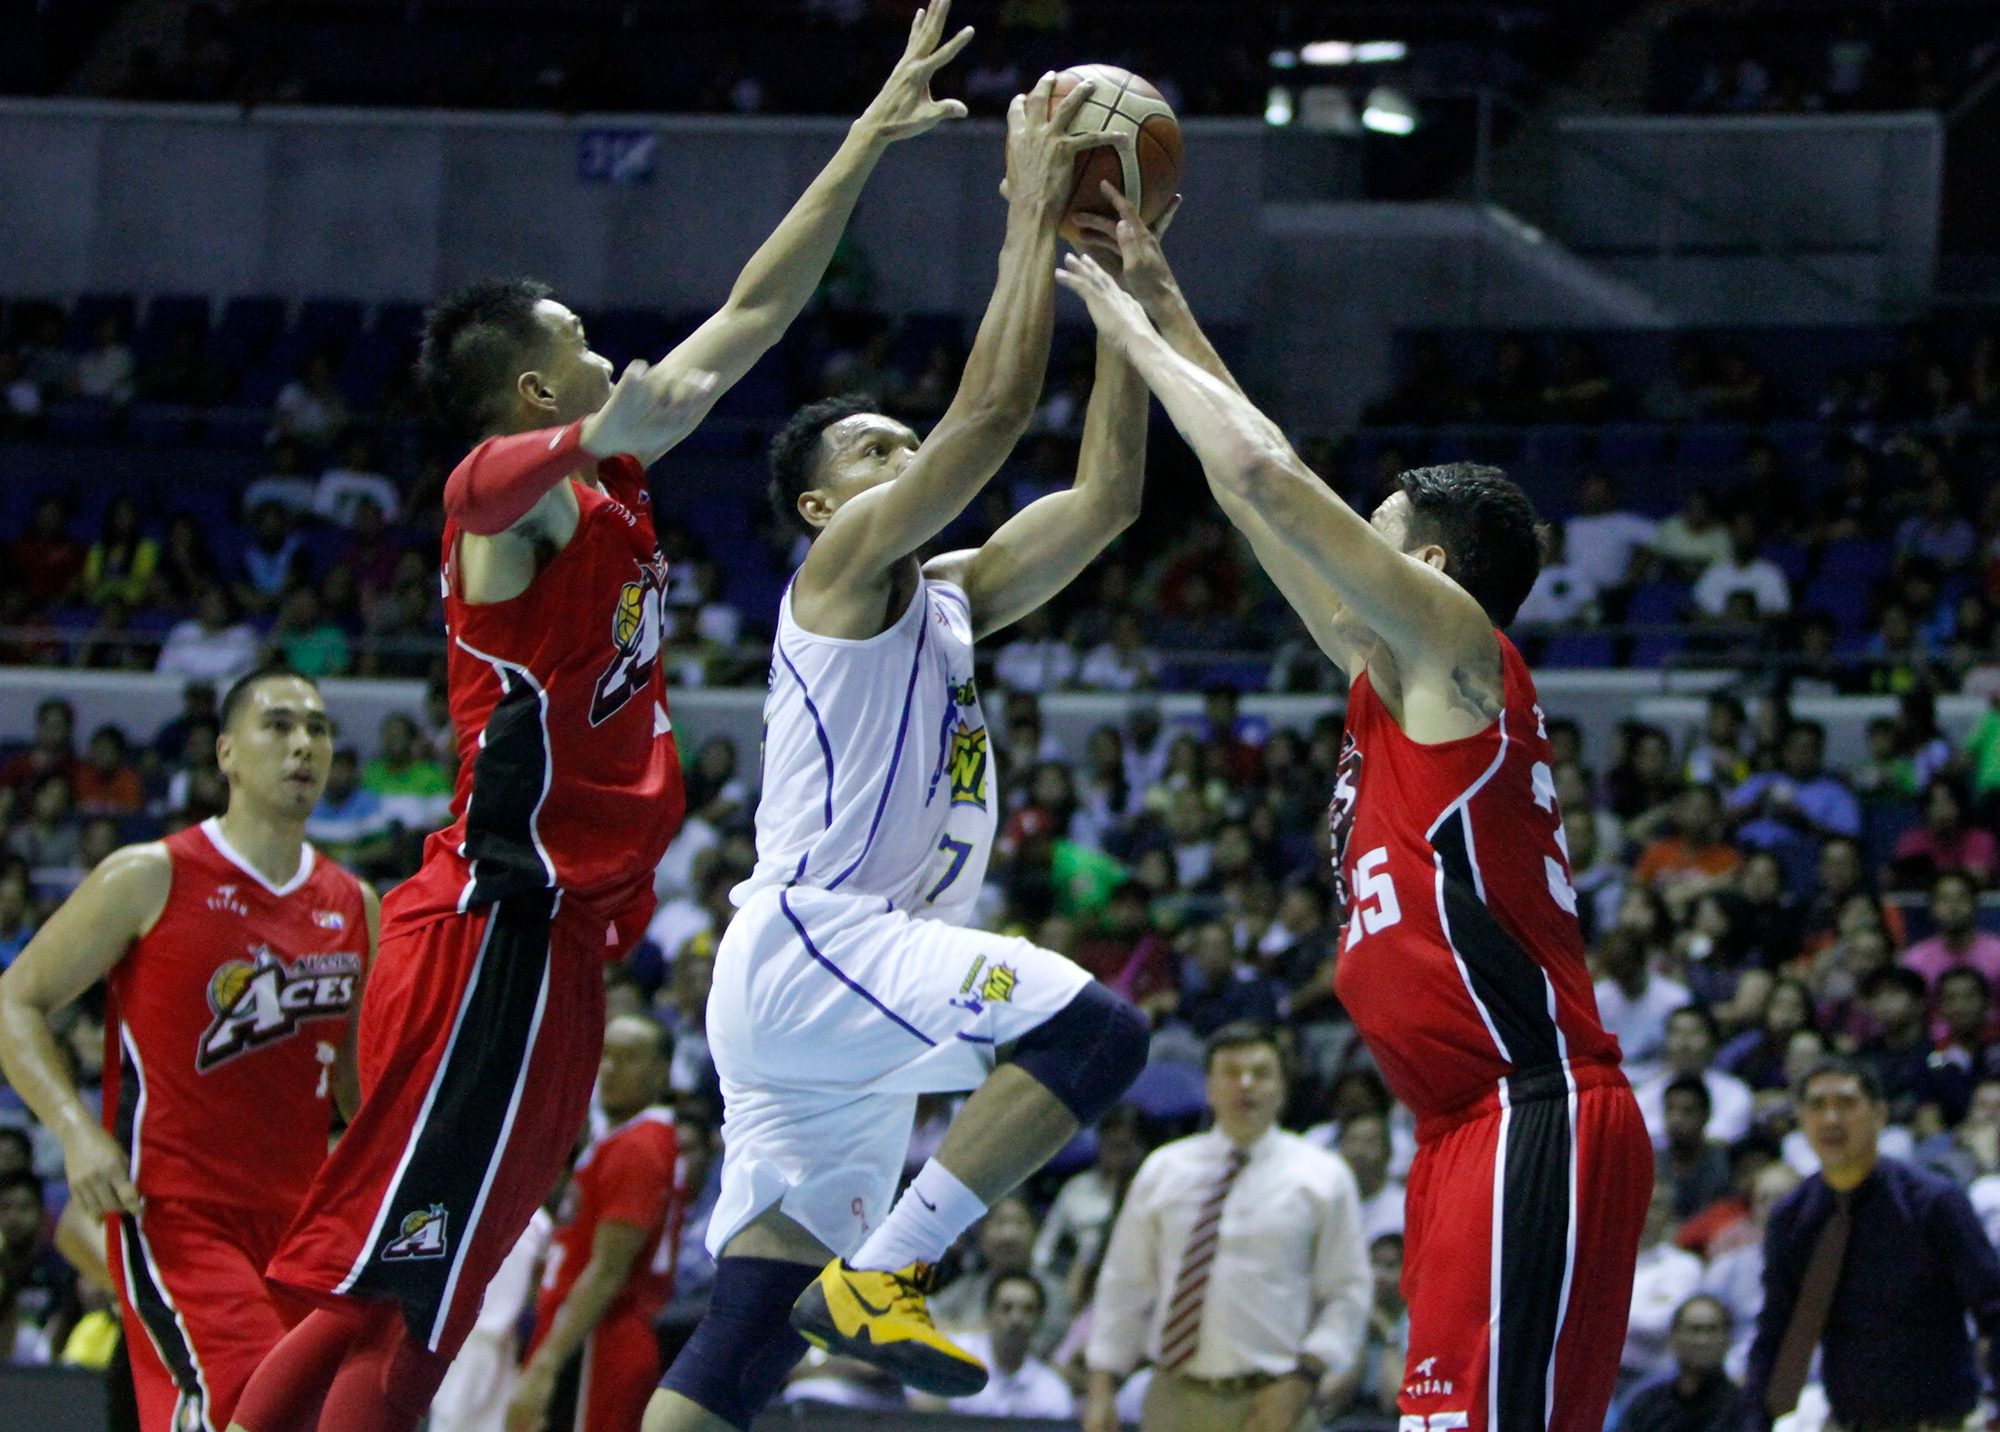 Dominant win against TNT shows how lethal Alaska is